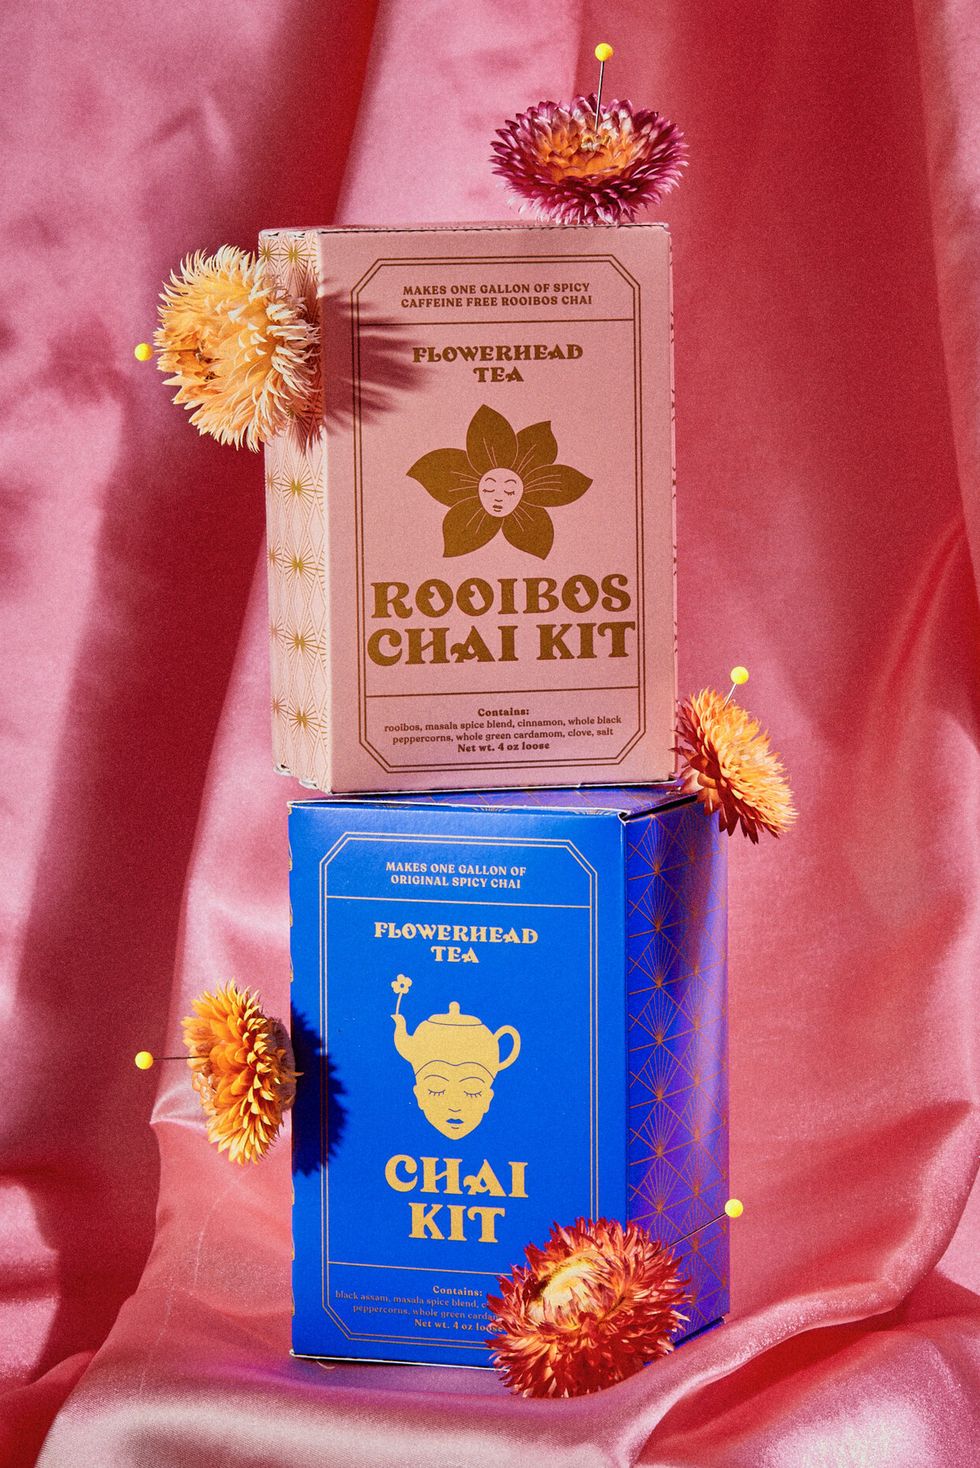 The Chai Kit Duo